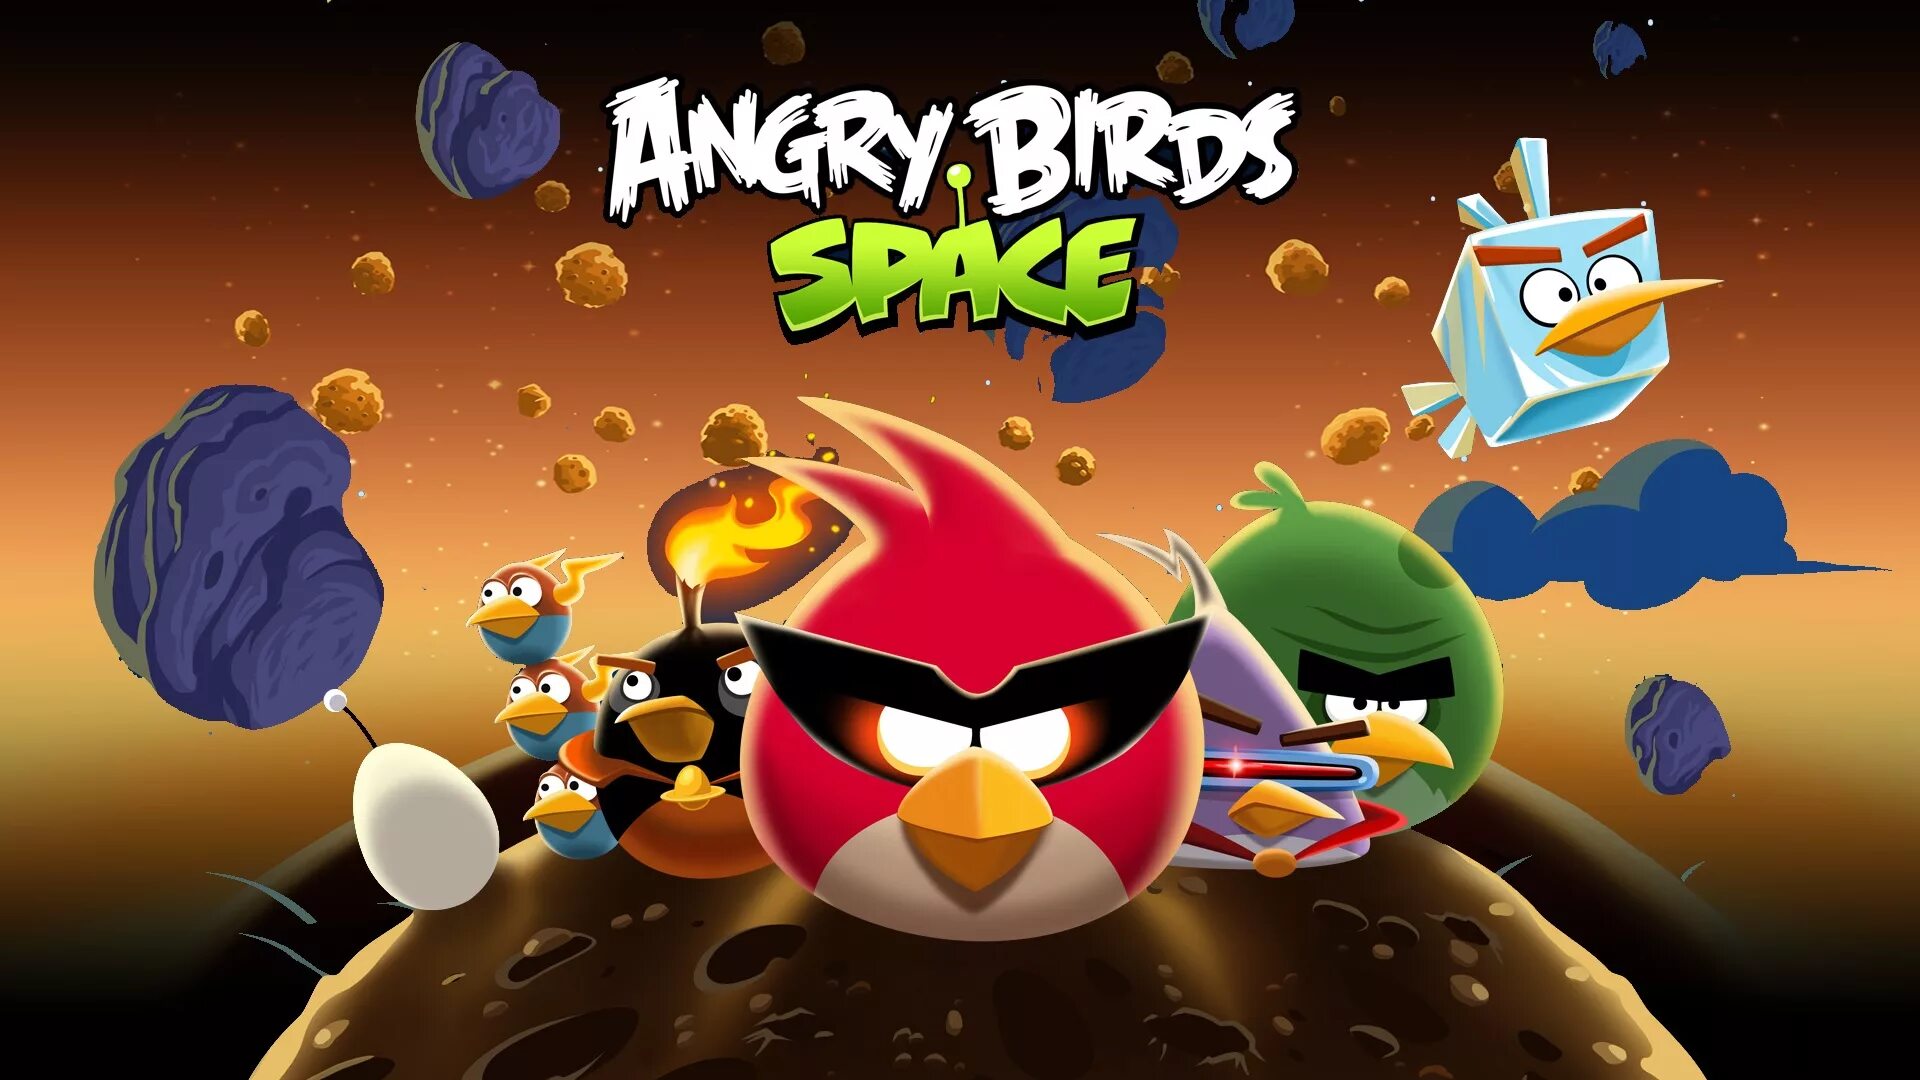 Angry birds versions. Angry Birds Space игра. Angry Birds Space 2012. Angry Birds игры Rovio. Angry Birds Space 2.2.1.